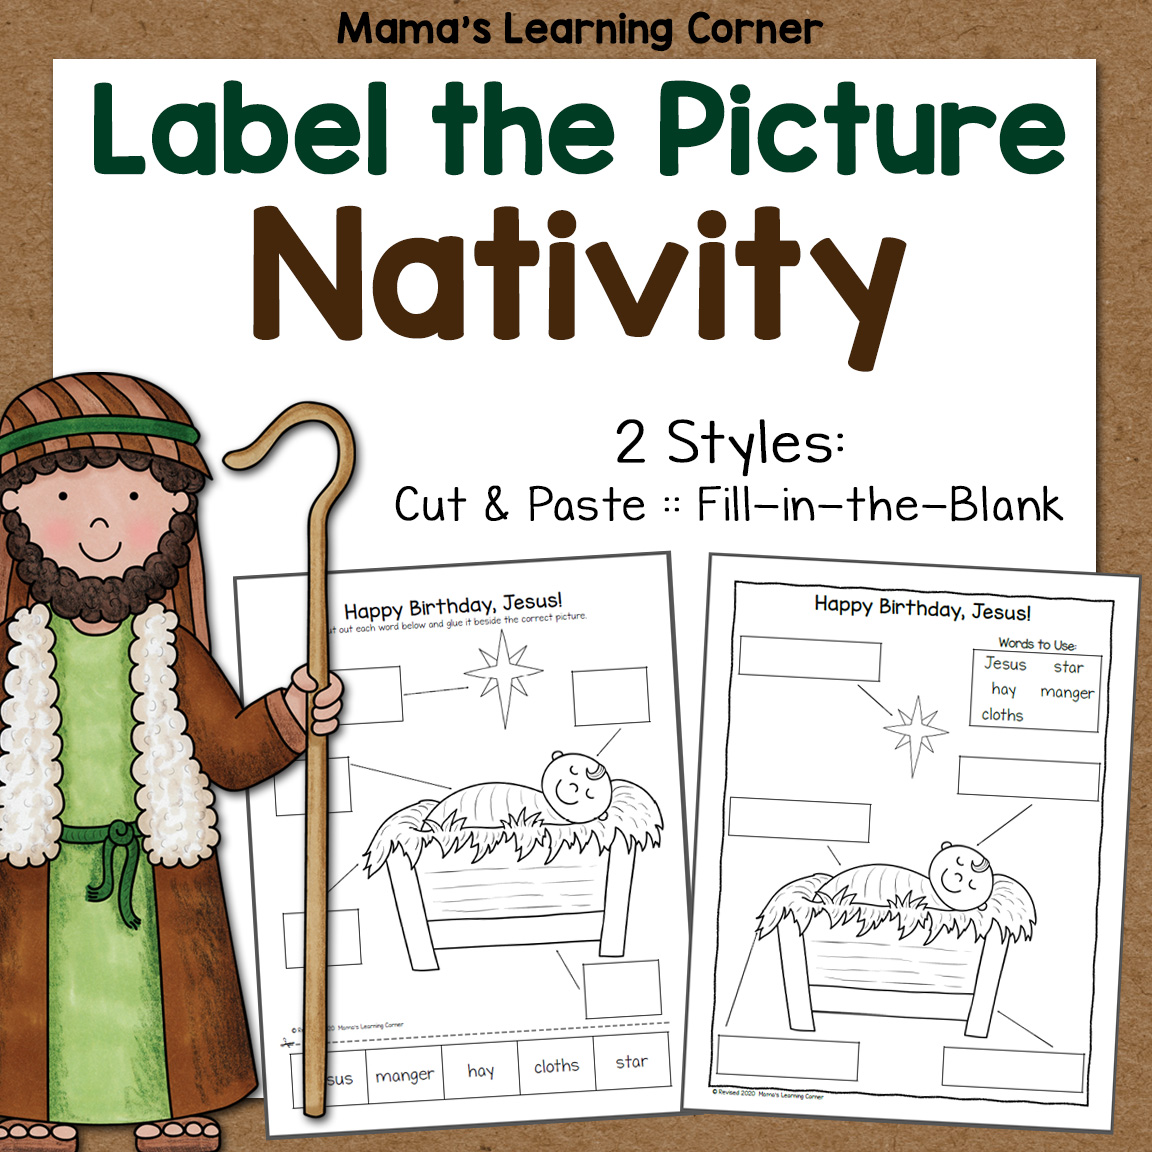 Nativity Label the Picture Revised